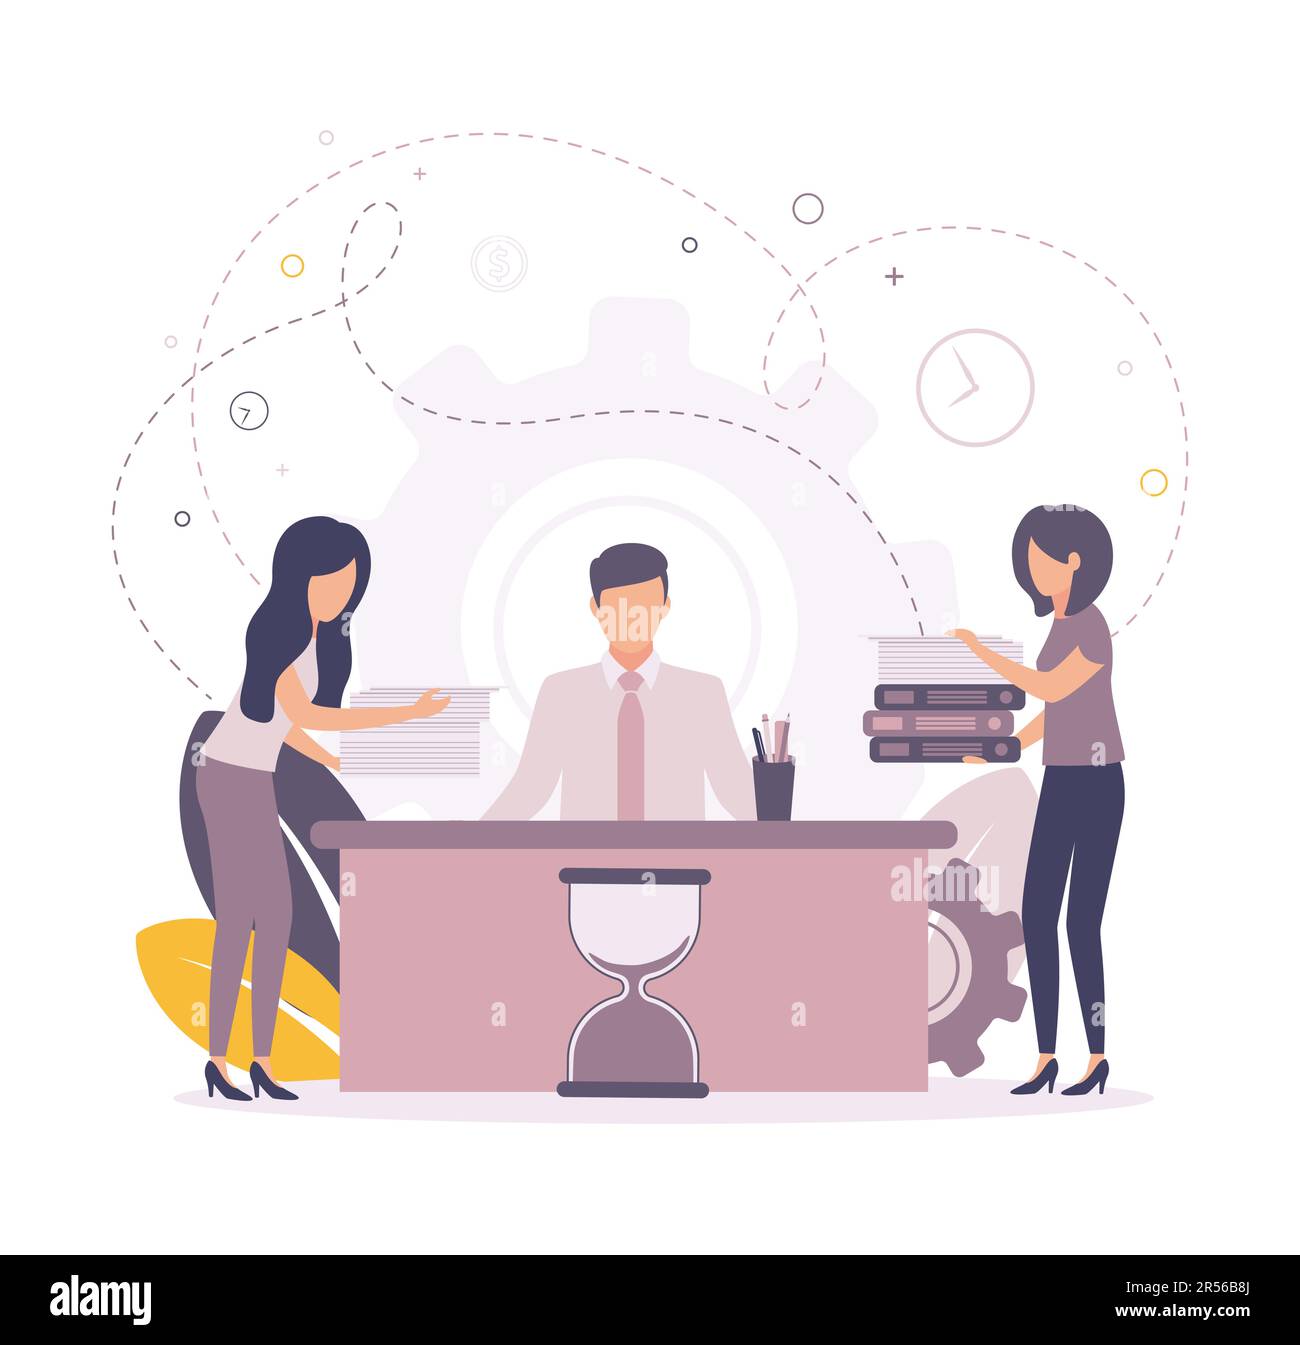 Time management illustration. Illustration of a man sitting at a table, an hourglass in front of him, next to a woman are holding documents, folders Stock Vector